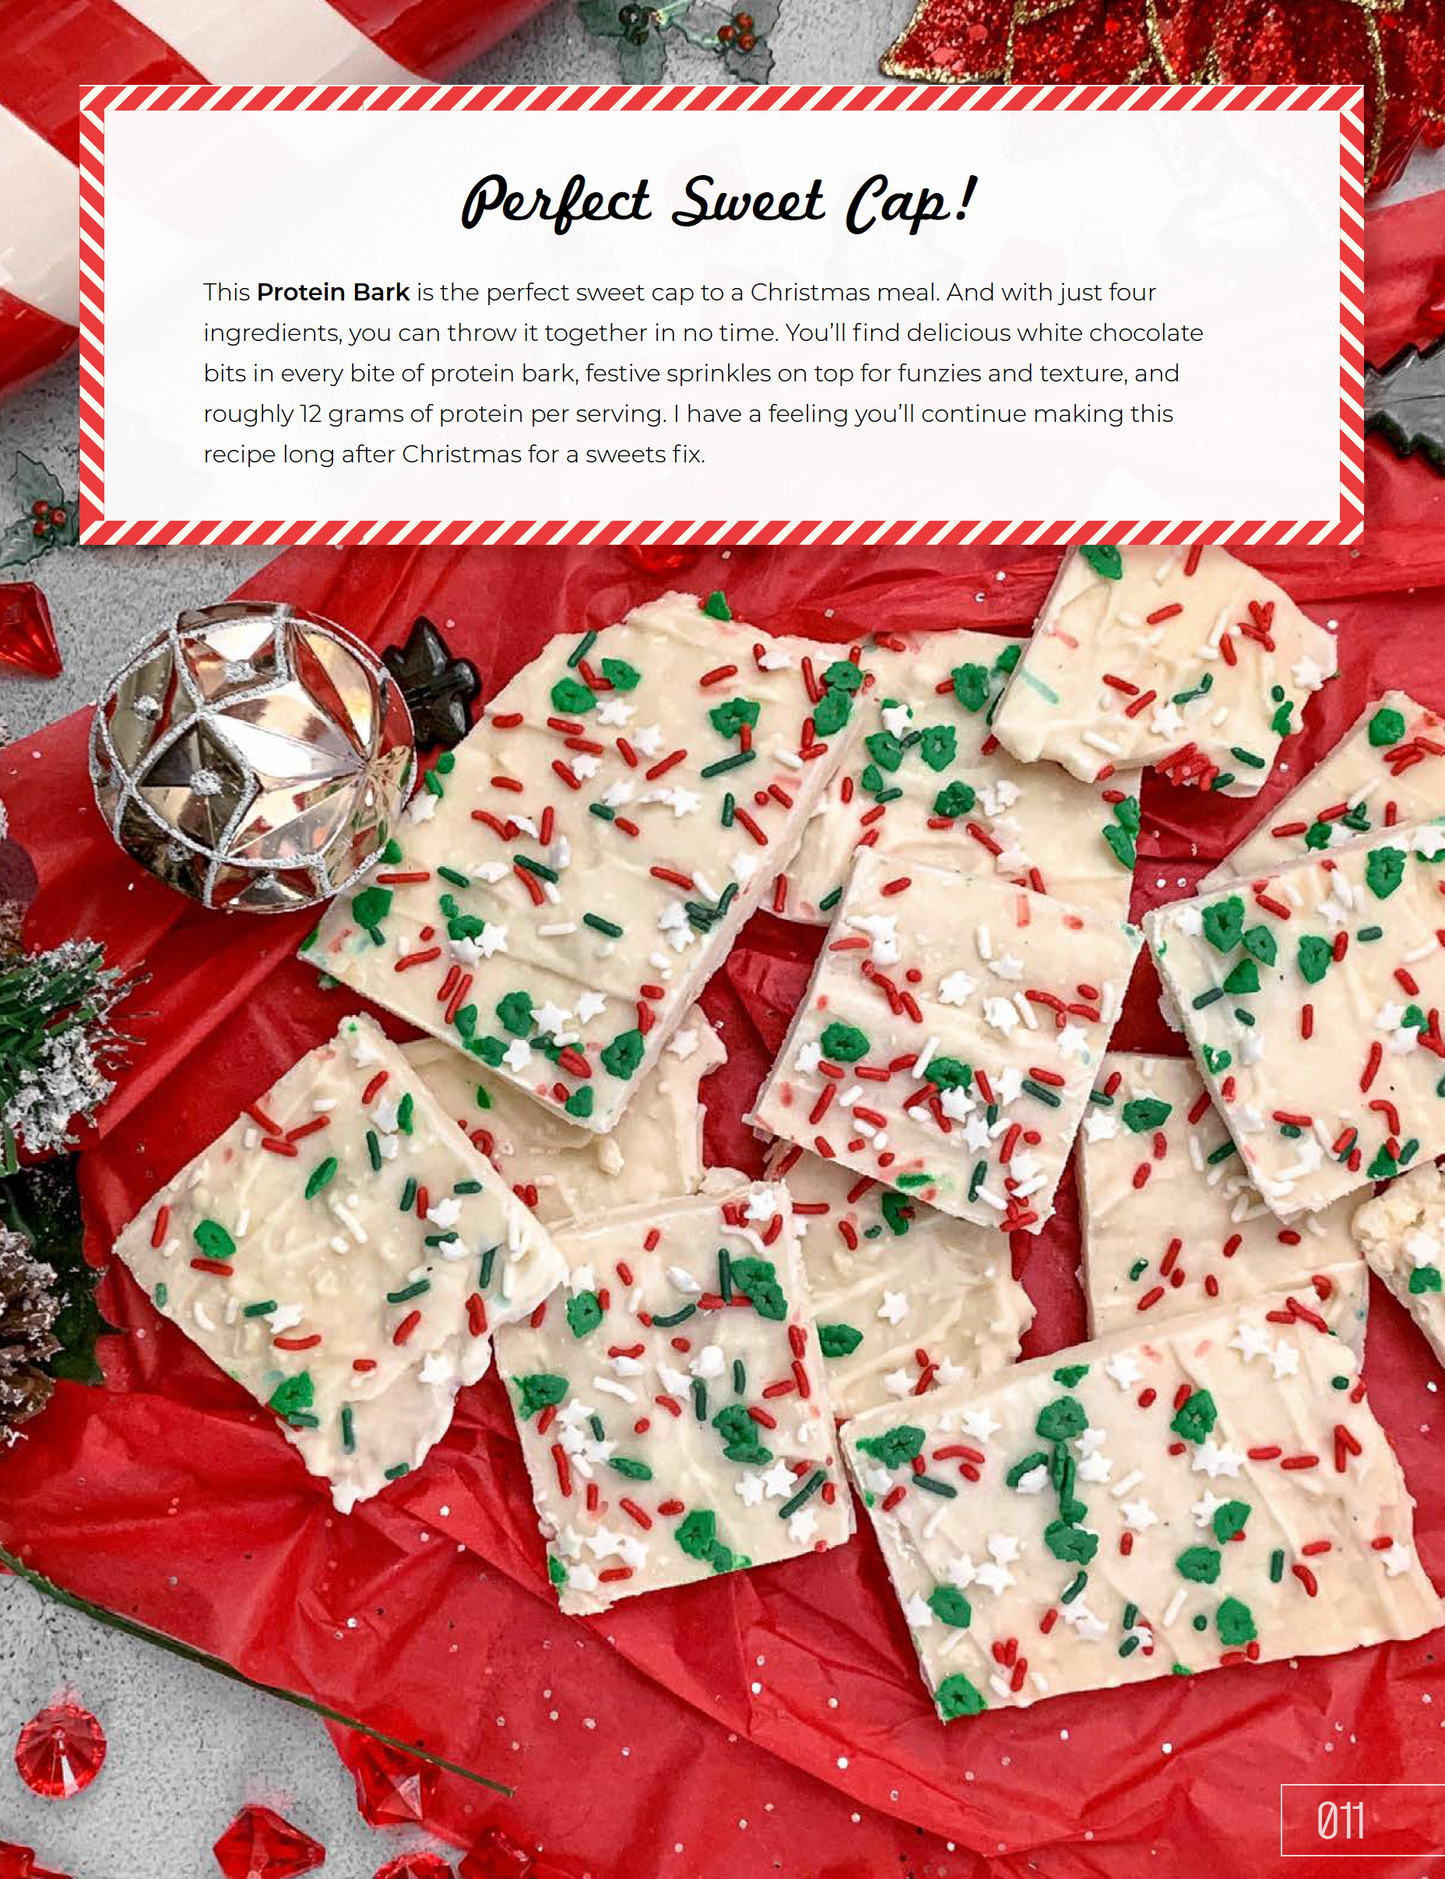 Holly's Christmas Recipe Guide